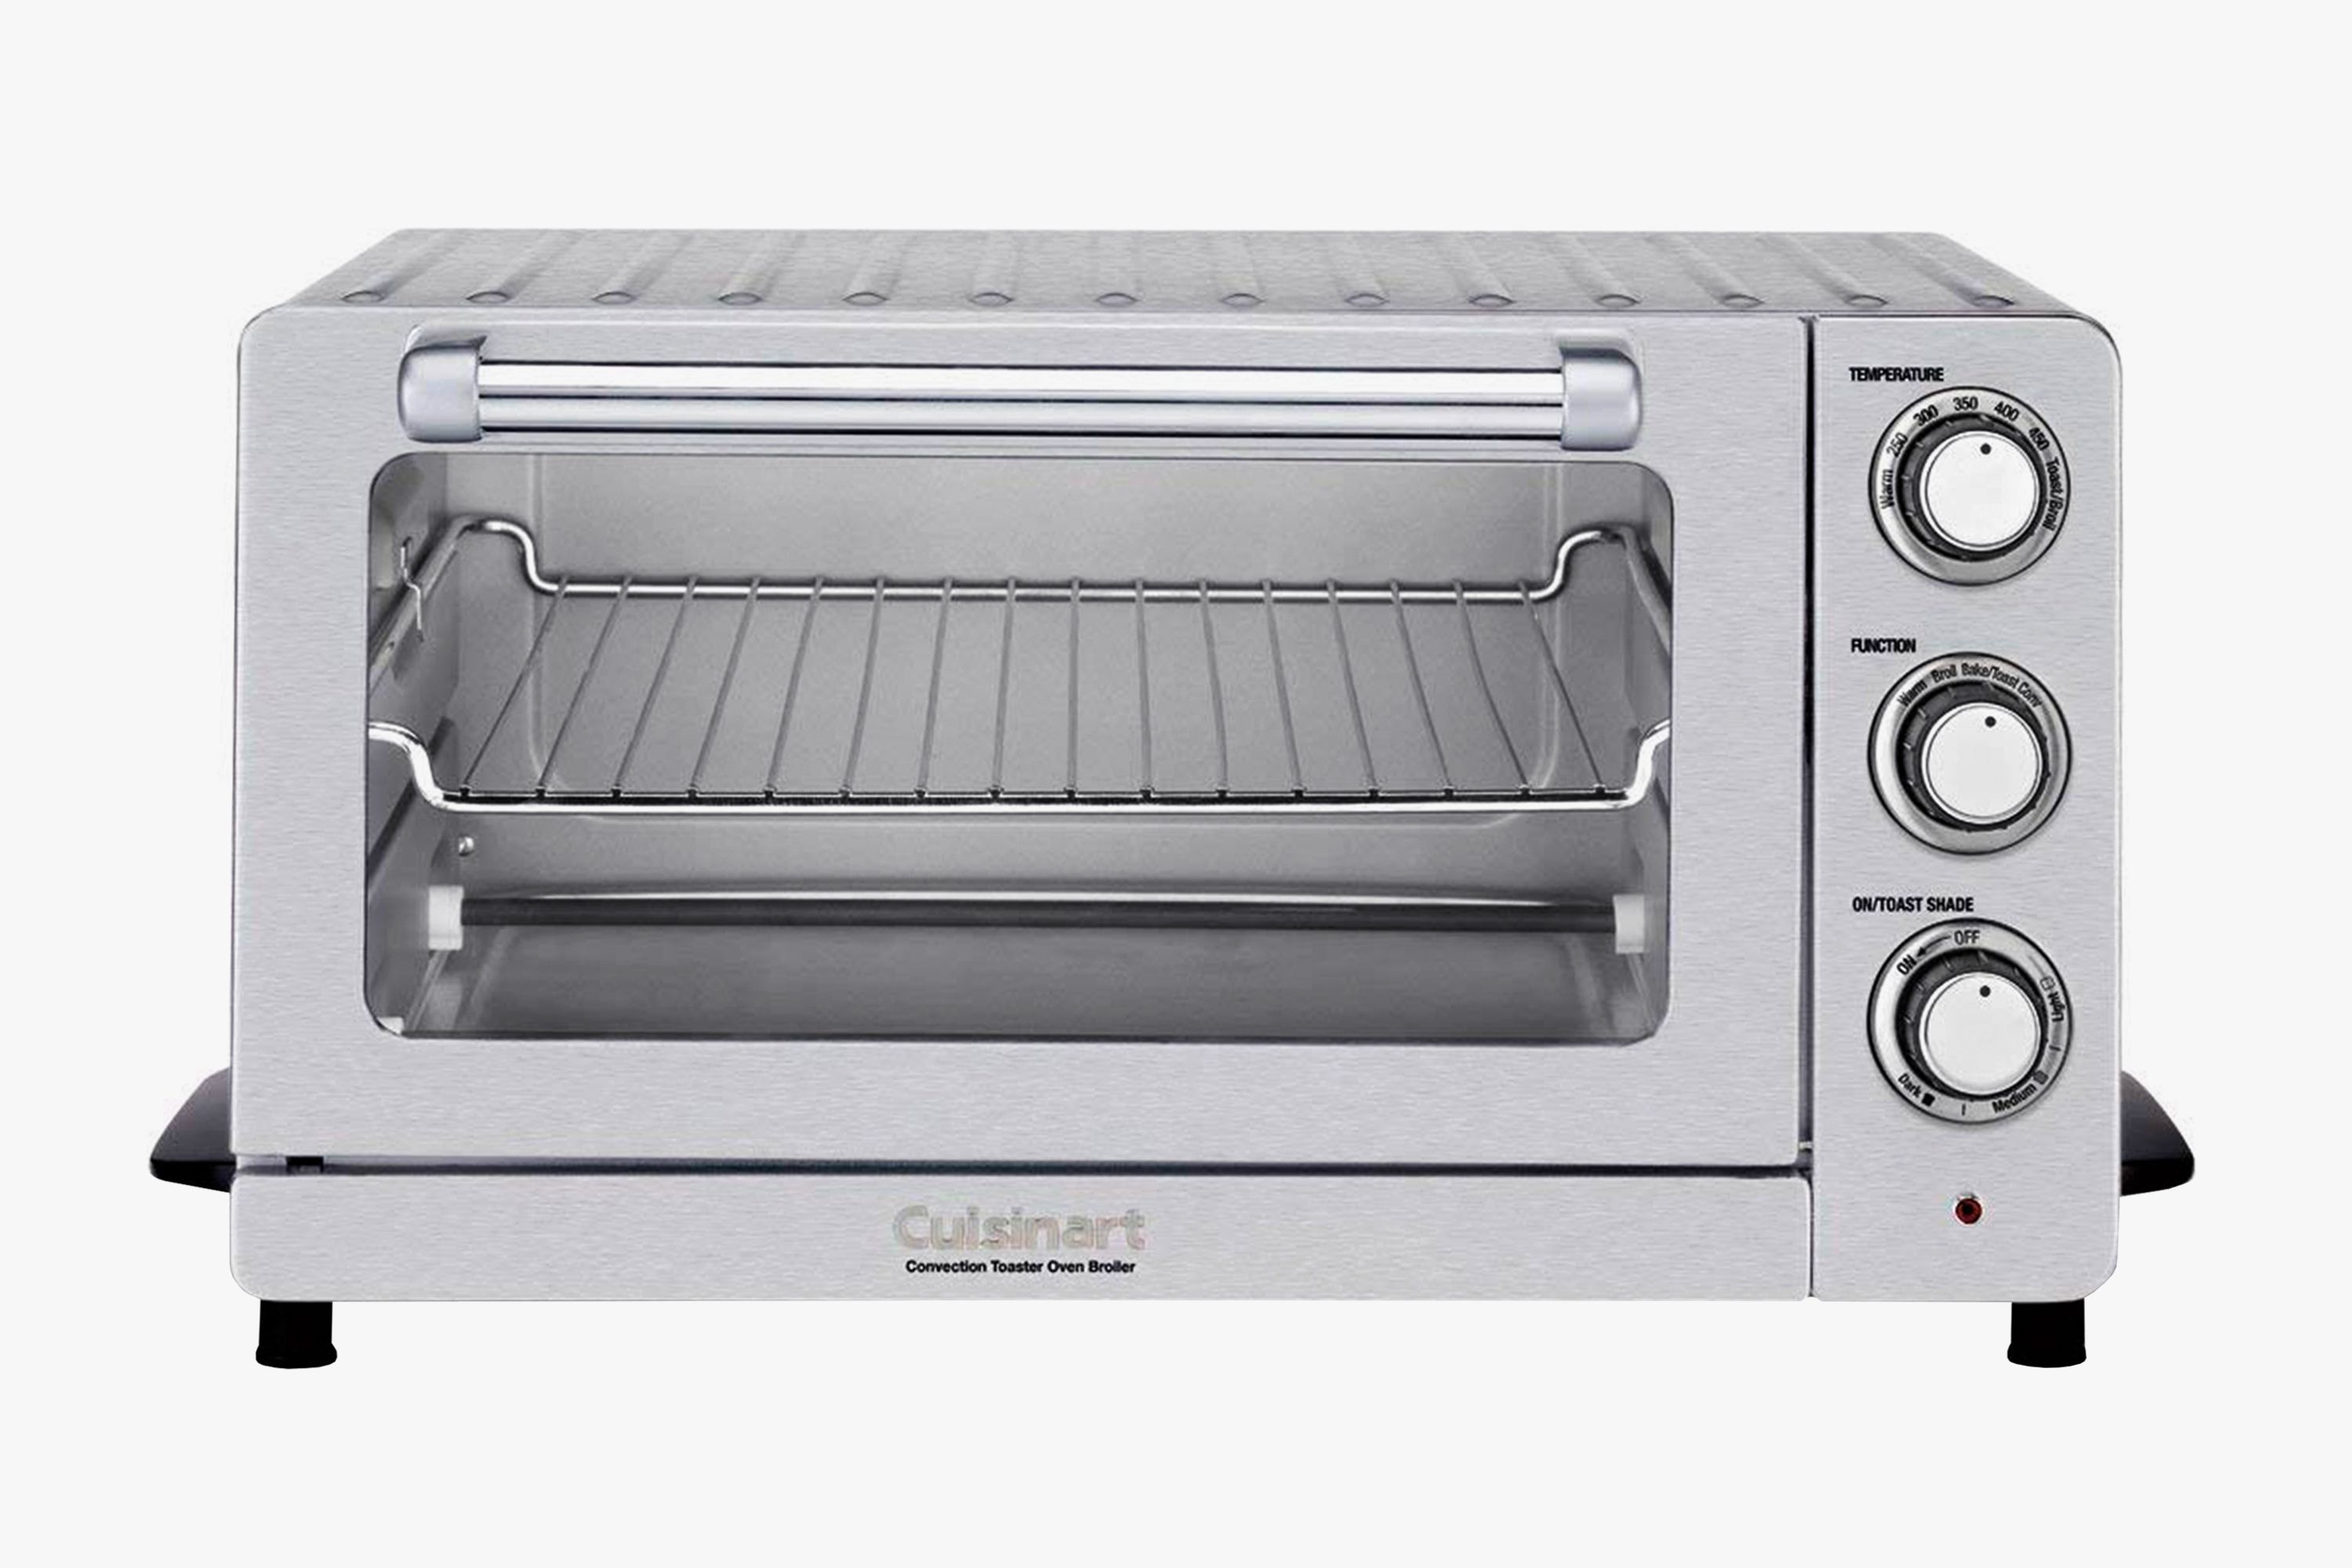 Cuisinart Toaster Oven Broiler with Convection